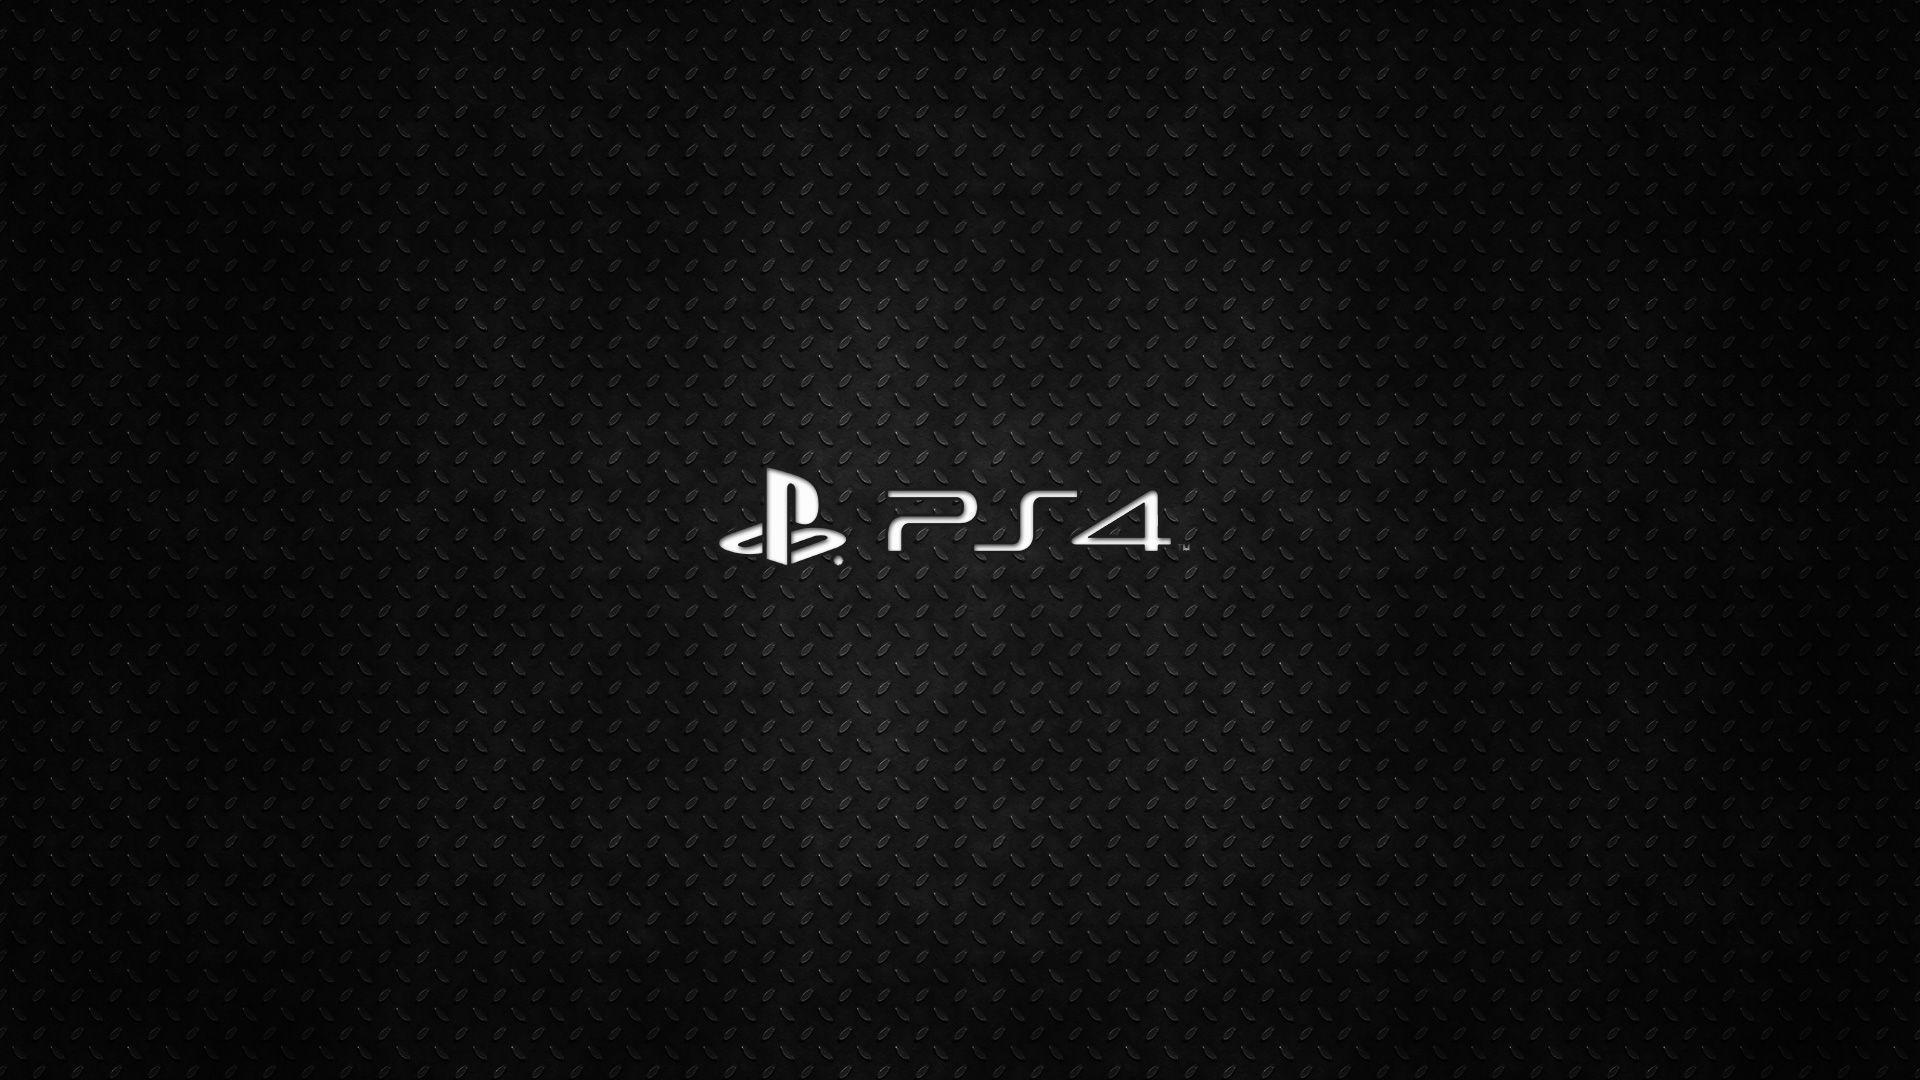 Download Playstation 4 Wallpaper 31883 1920x1080 px High Resolution